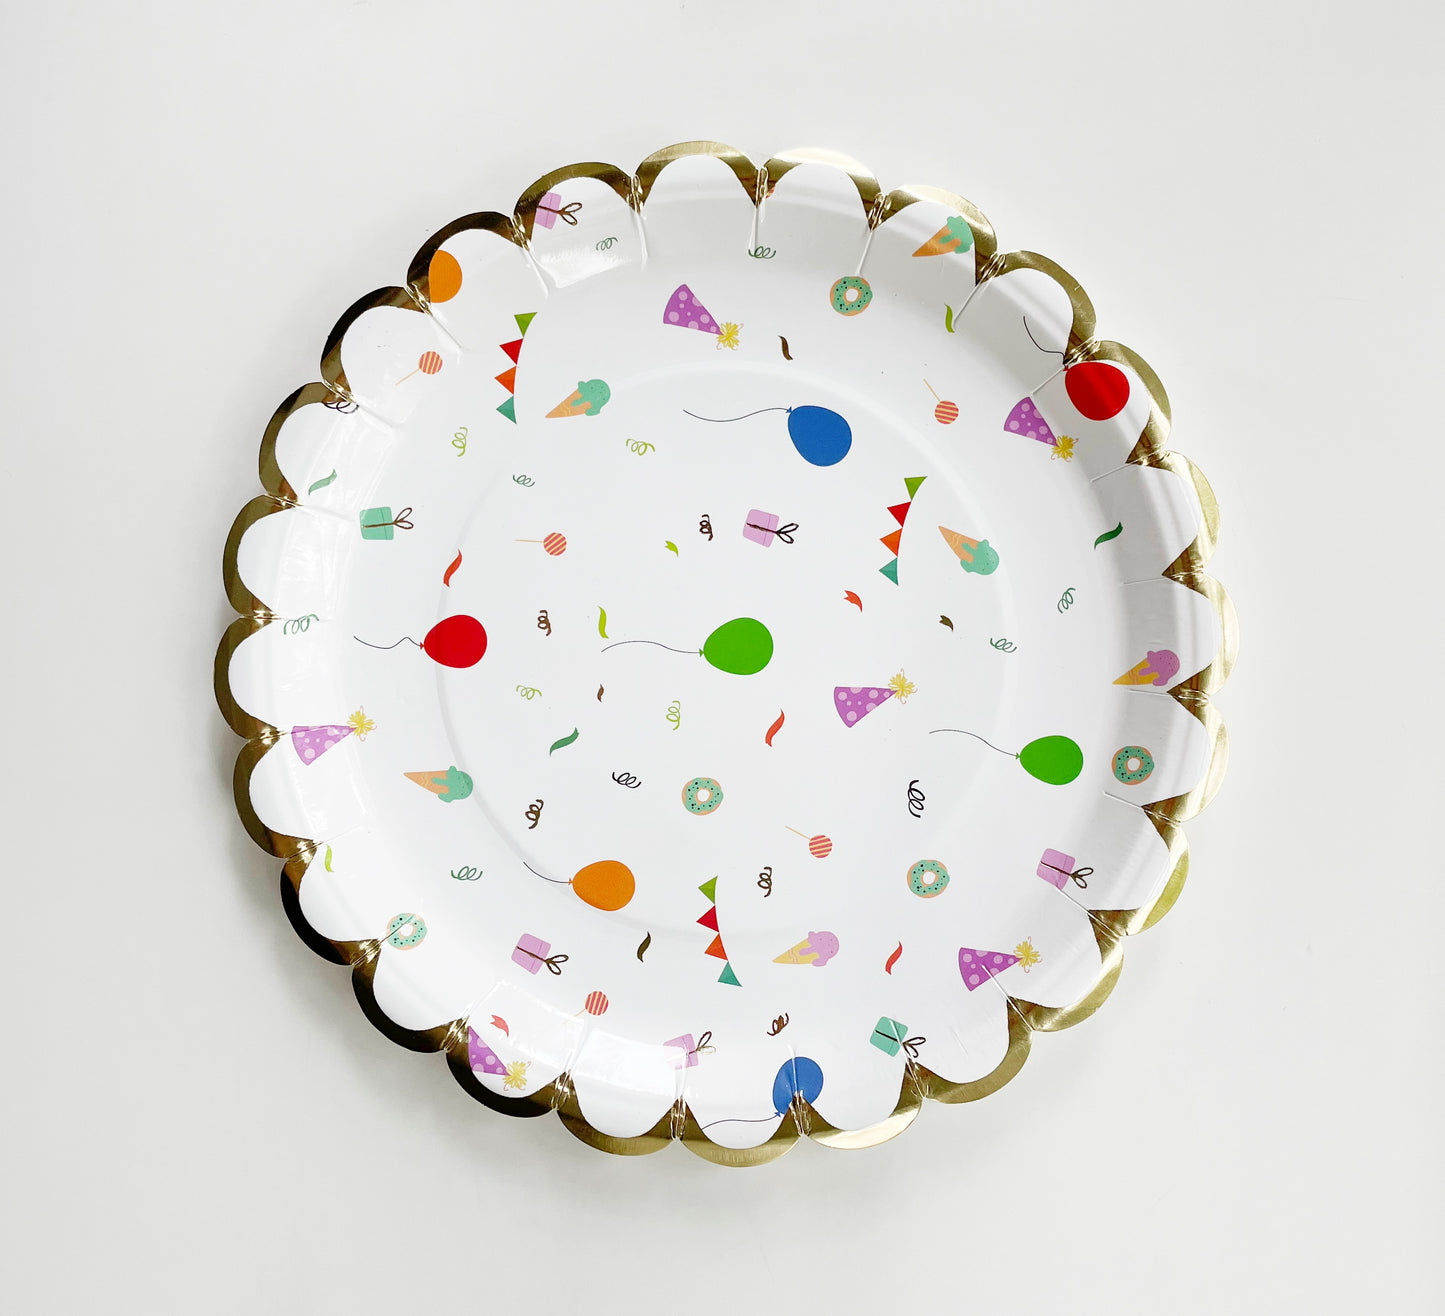 The small Celebration paper party plates have a gold foil scalloped edge. The celebration pattern features green, orange and blue balloons, ice cream cones, party hats, party garlands, birthday gifts and donuts.